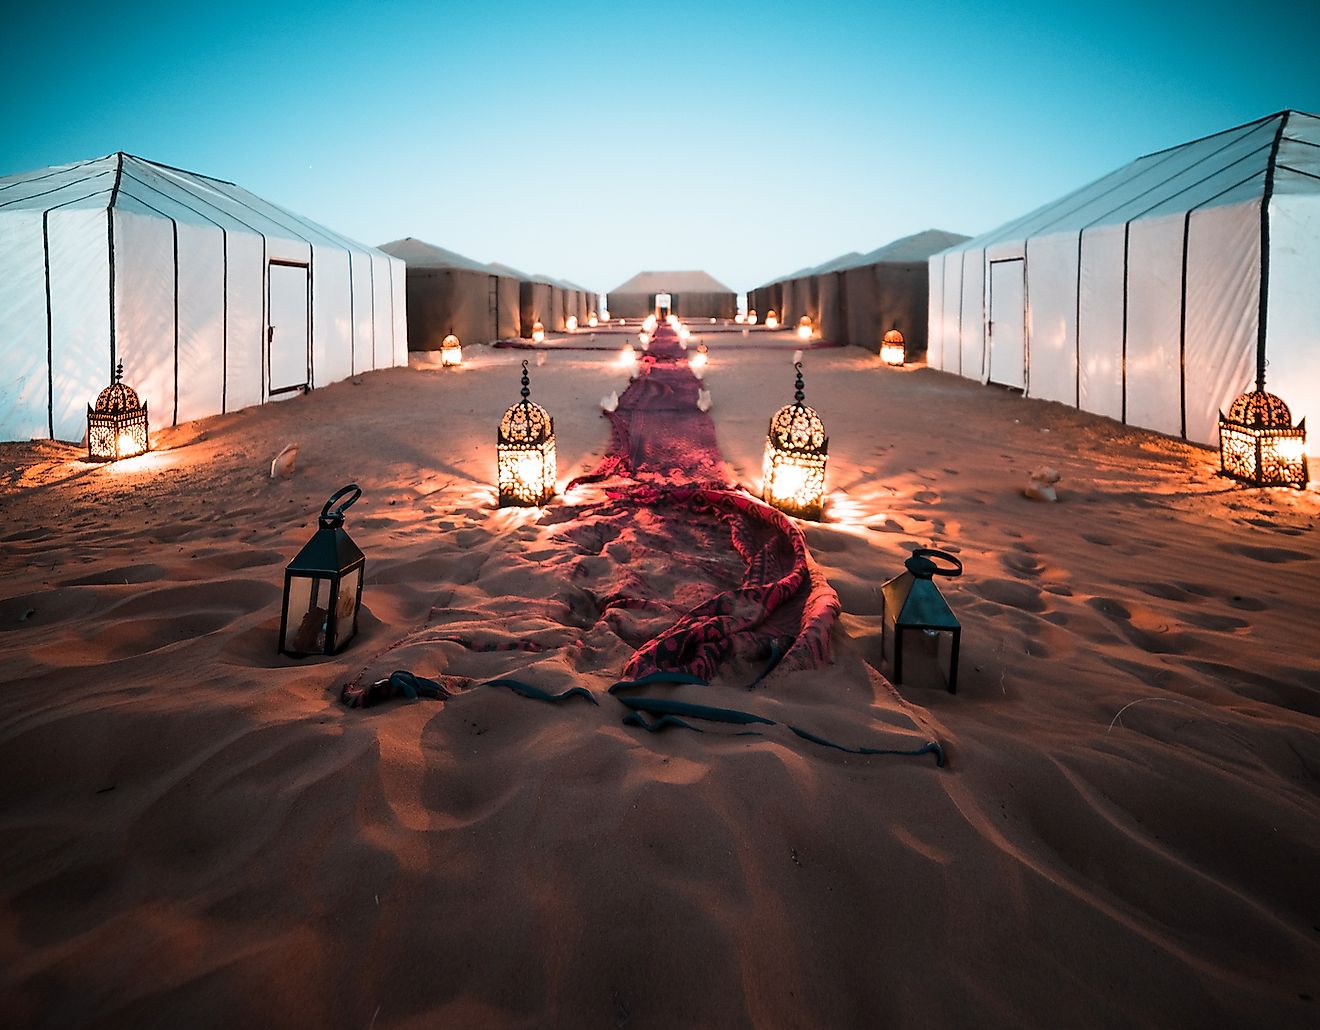 A luxury camp in the Sahara Desert. Image credit: WeAreProductions/Shutterstock.com